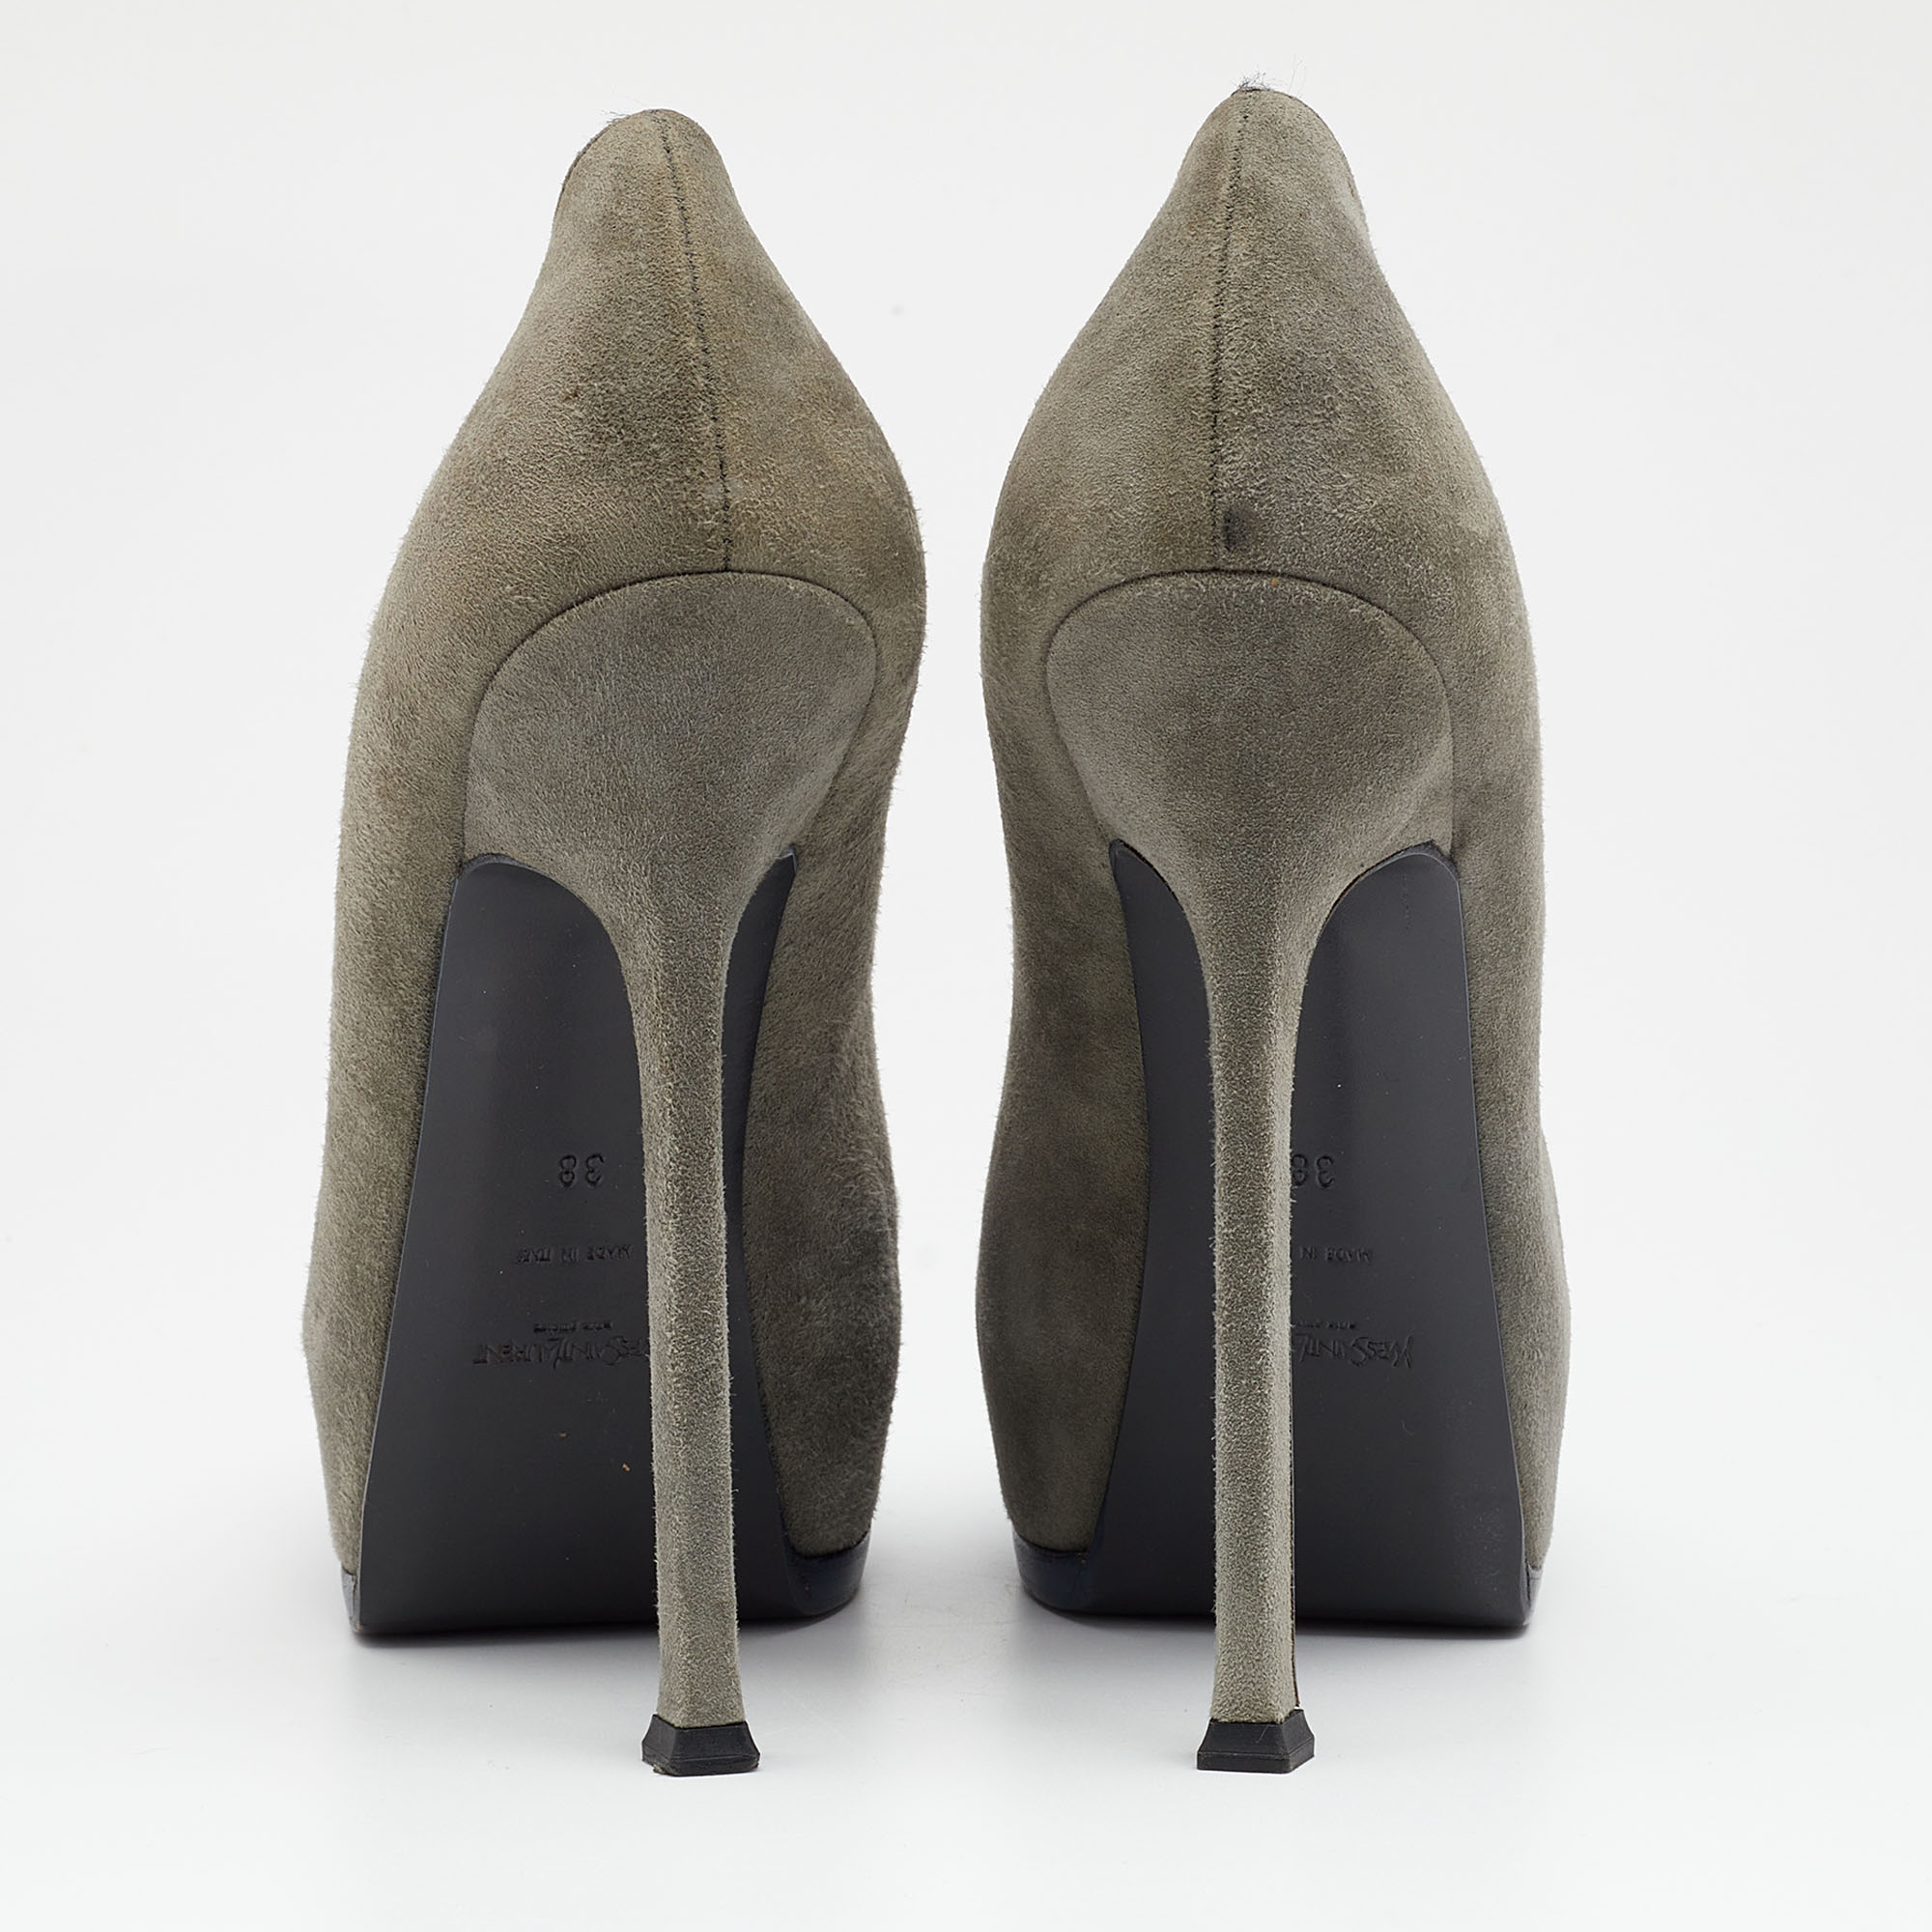 Yves Saint Laurent Grey Suede And Patent Leather Tribtoo Platform Pumps Size 38